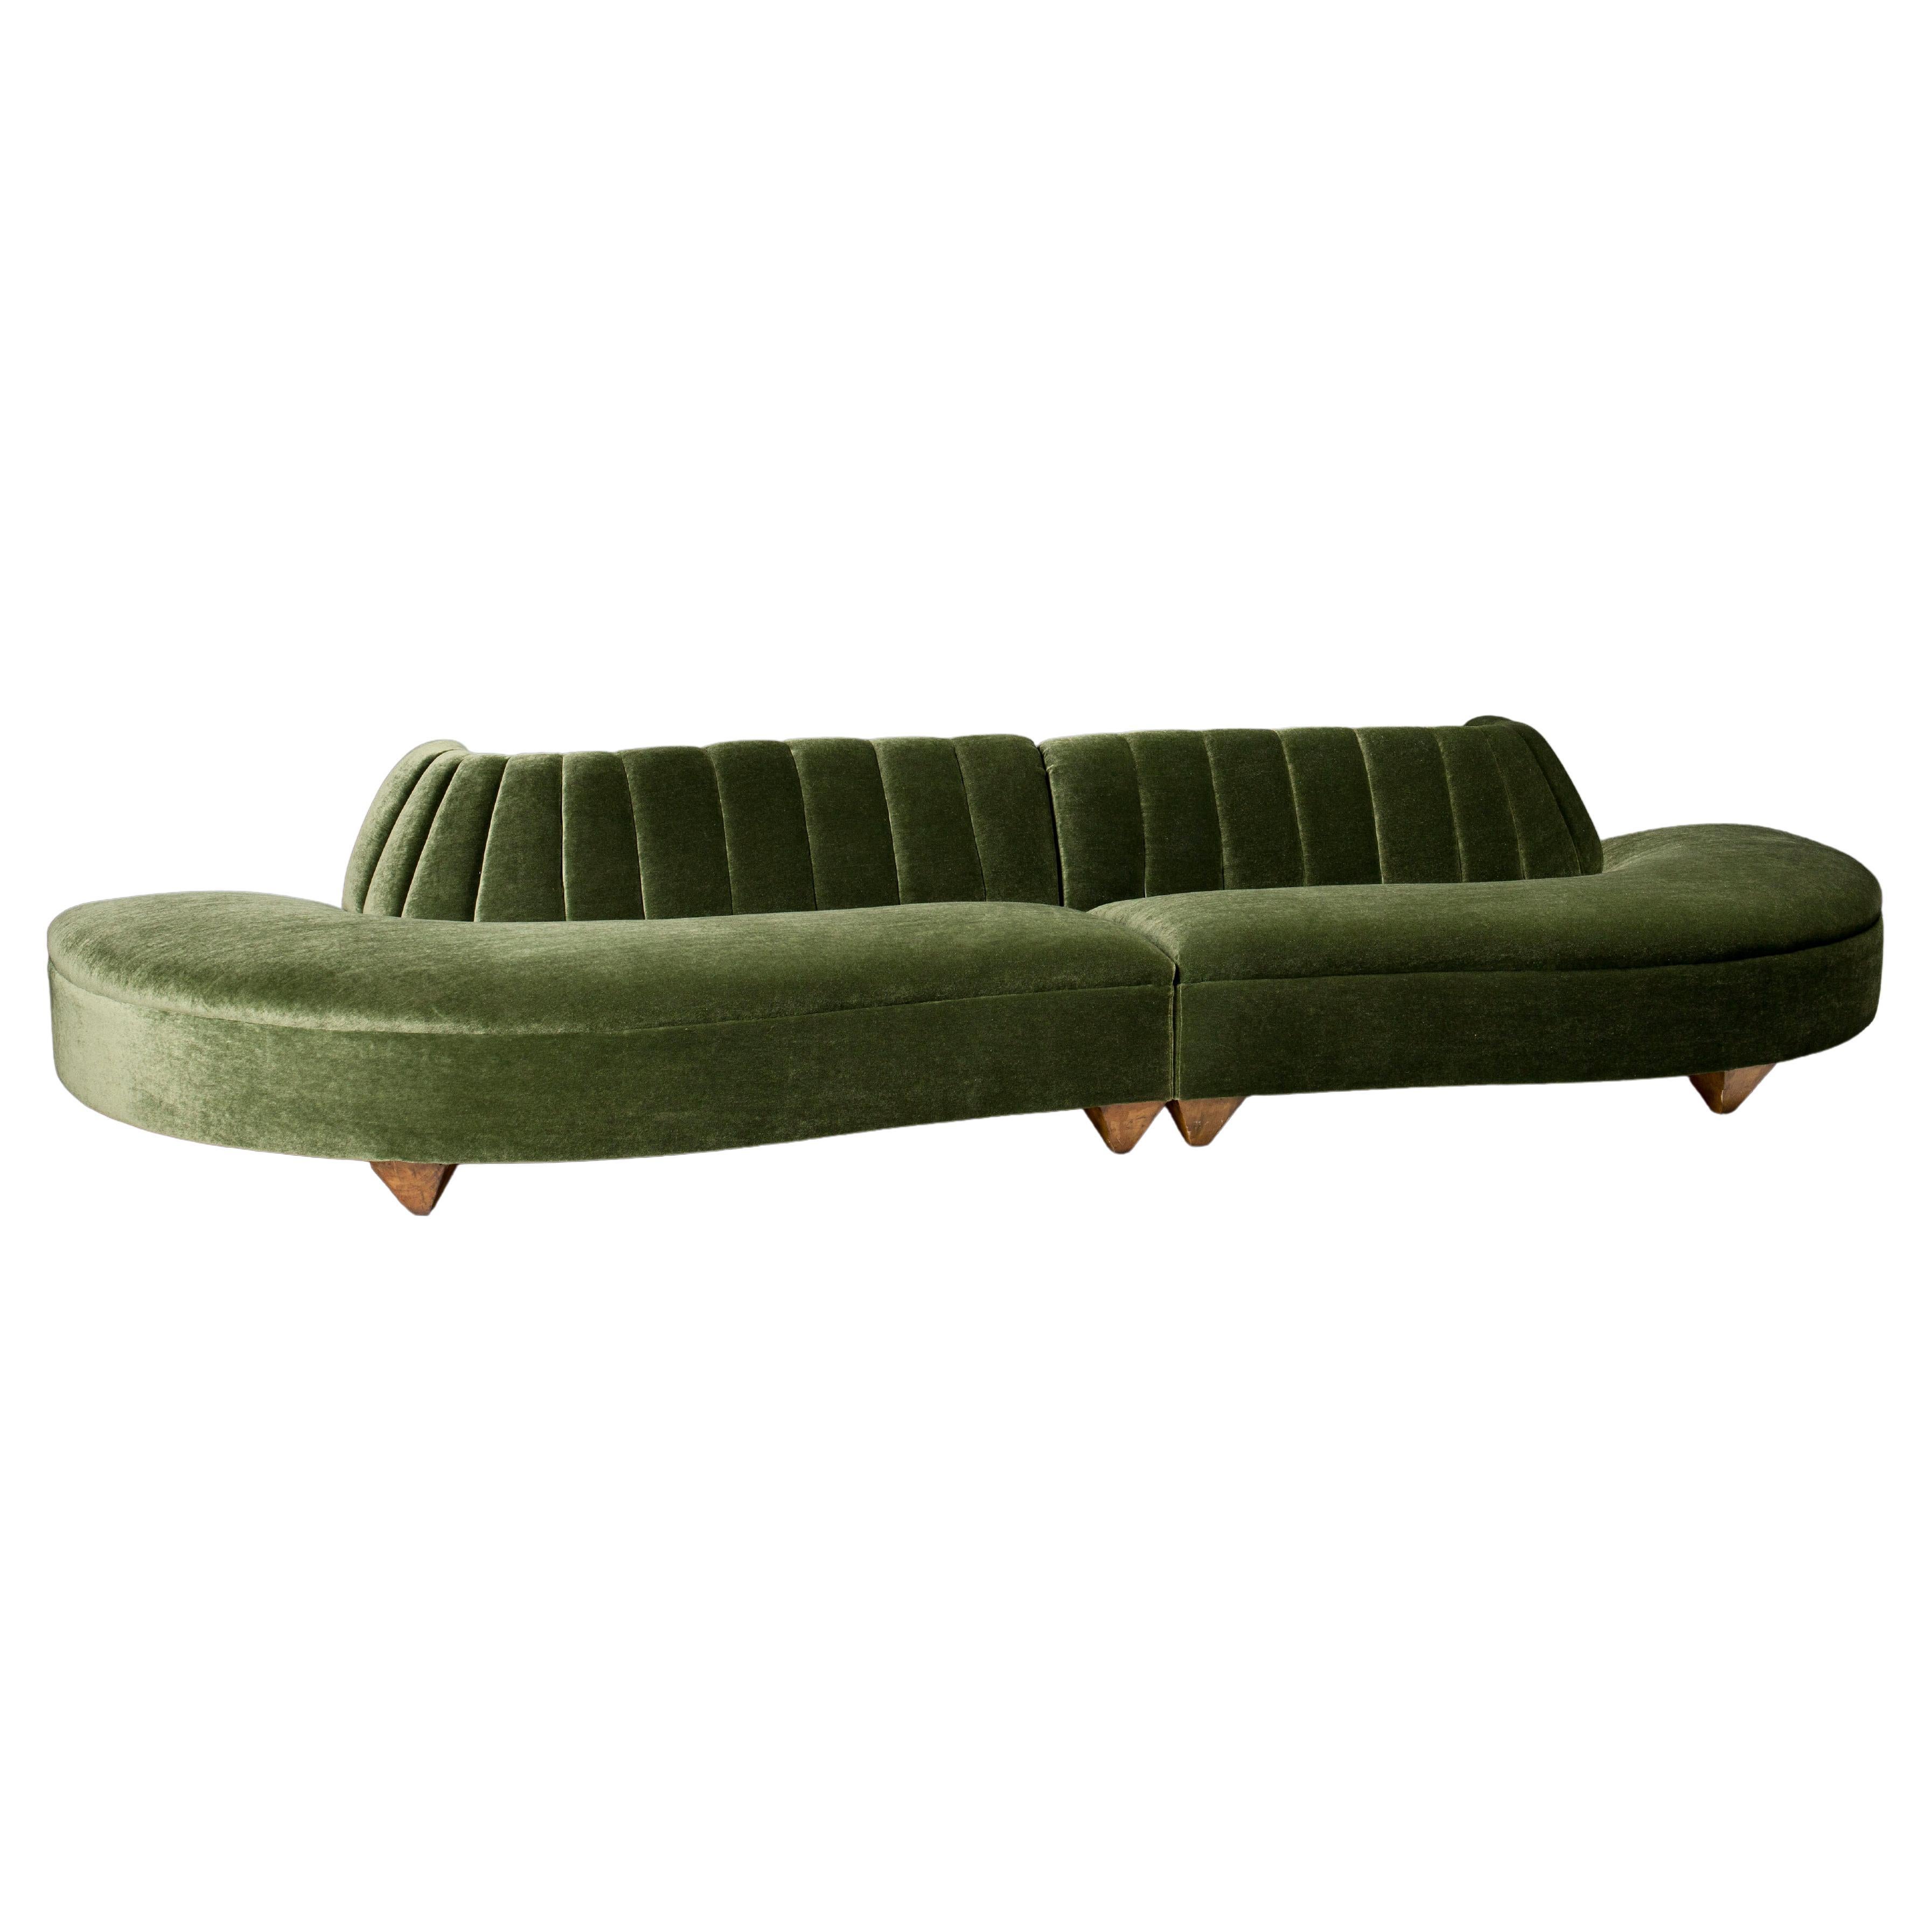 1940s Art Deco Curved Couch For Sale